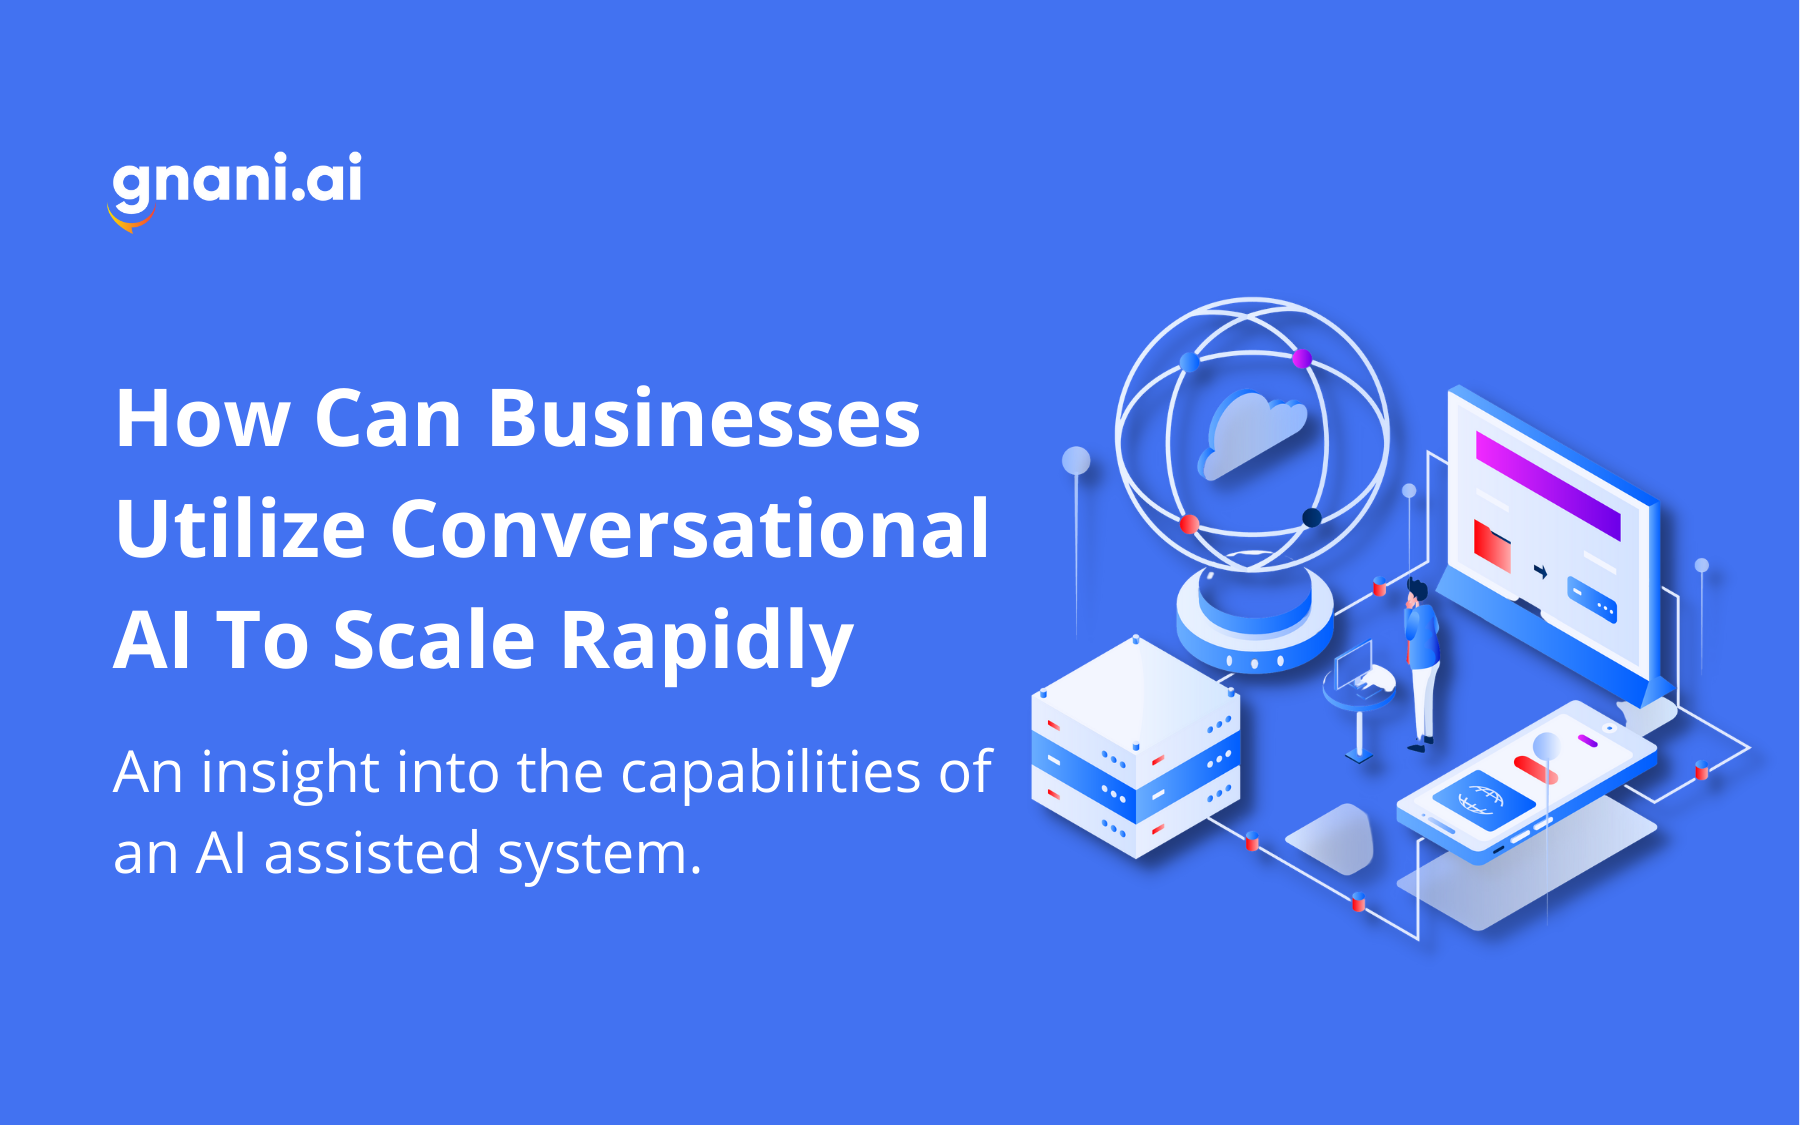 How Can Businesses Utilize Conversational AI To Scale Rapidly